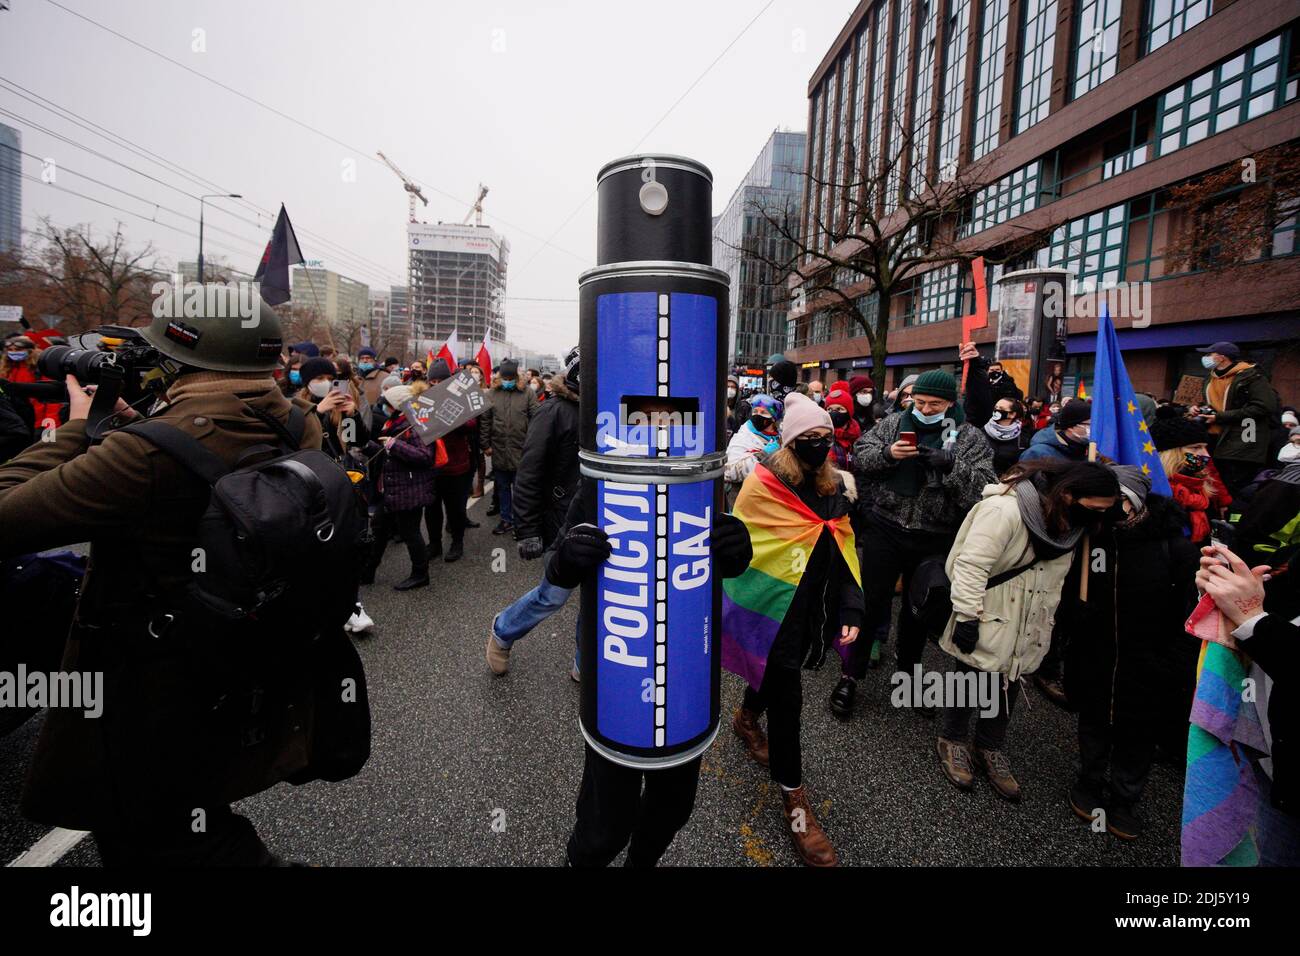 A protesters wears a costume resembling a can of pepper spray used by police in Warsaw, Poland on December 13, 2020. Thousands took to the streets on Stock Photo